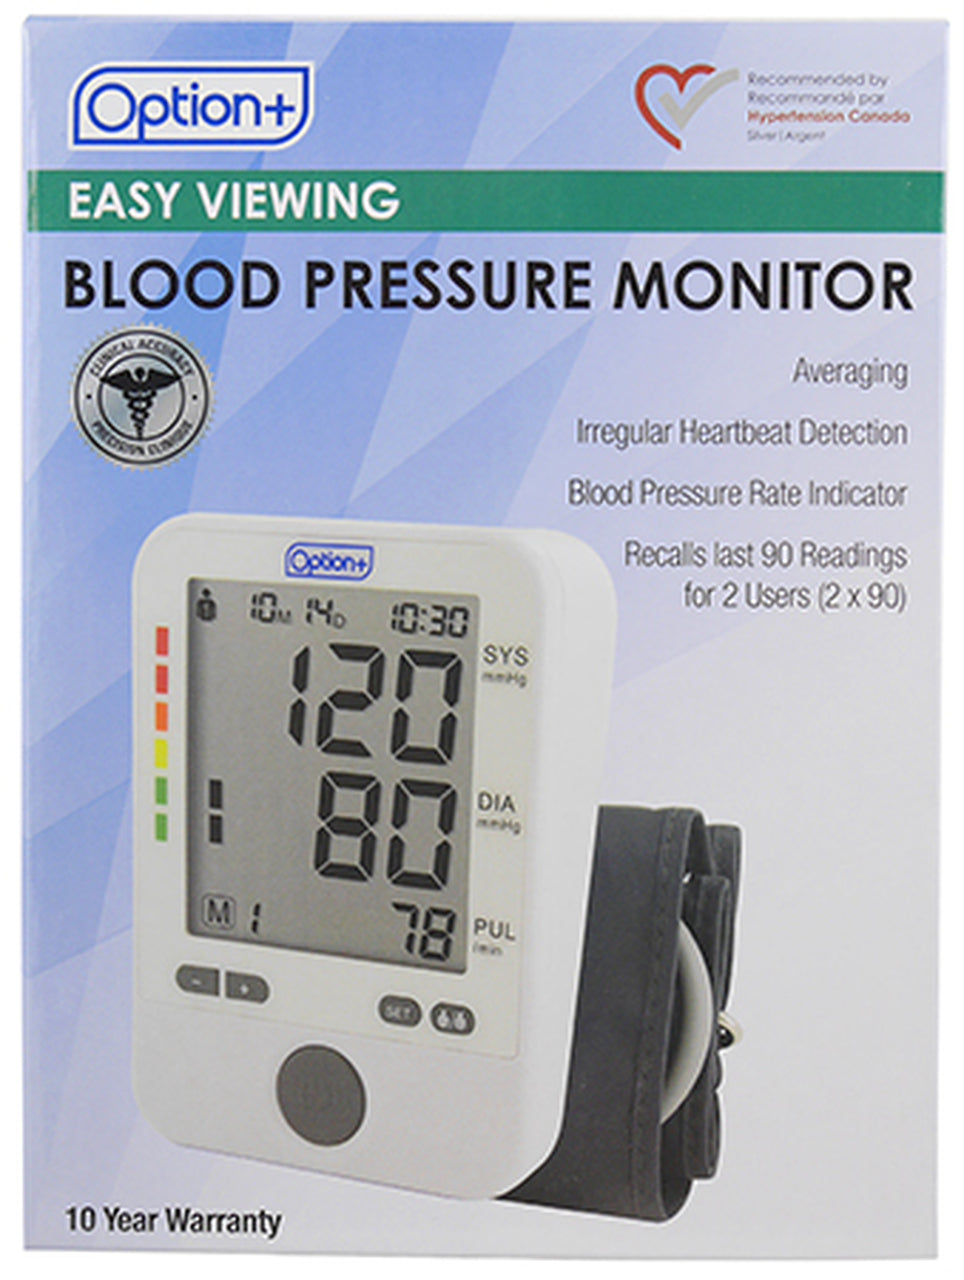 Option+: Easy Viewing Blood Pressure Monitor